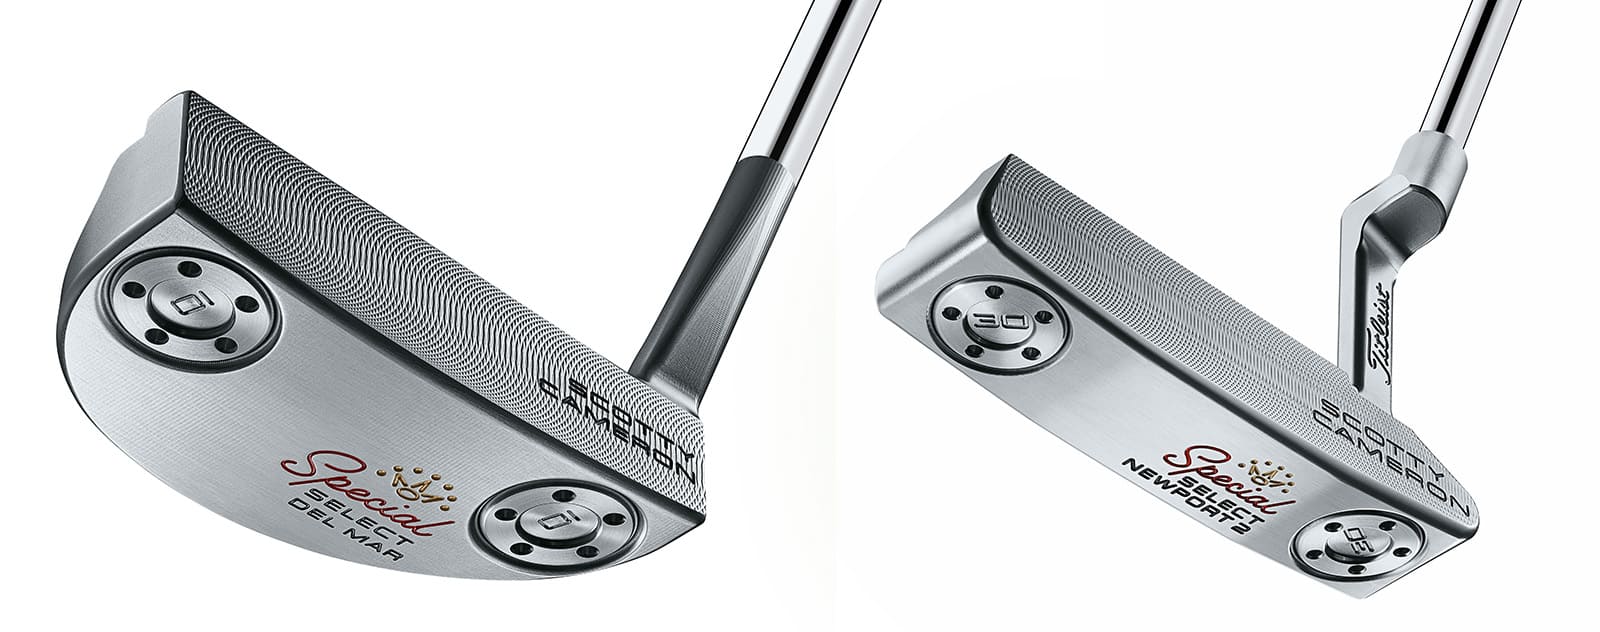 FIRST LOOK: Scotty Cameron Special Select putter line - Worldwide Golf